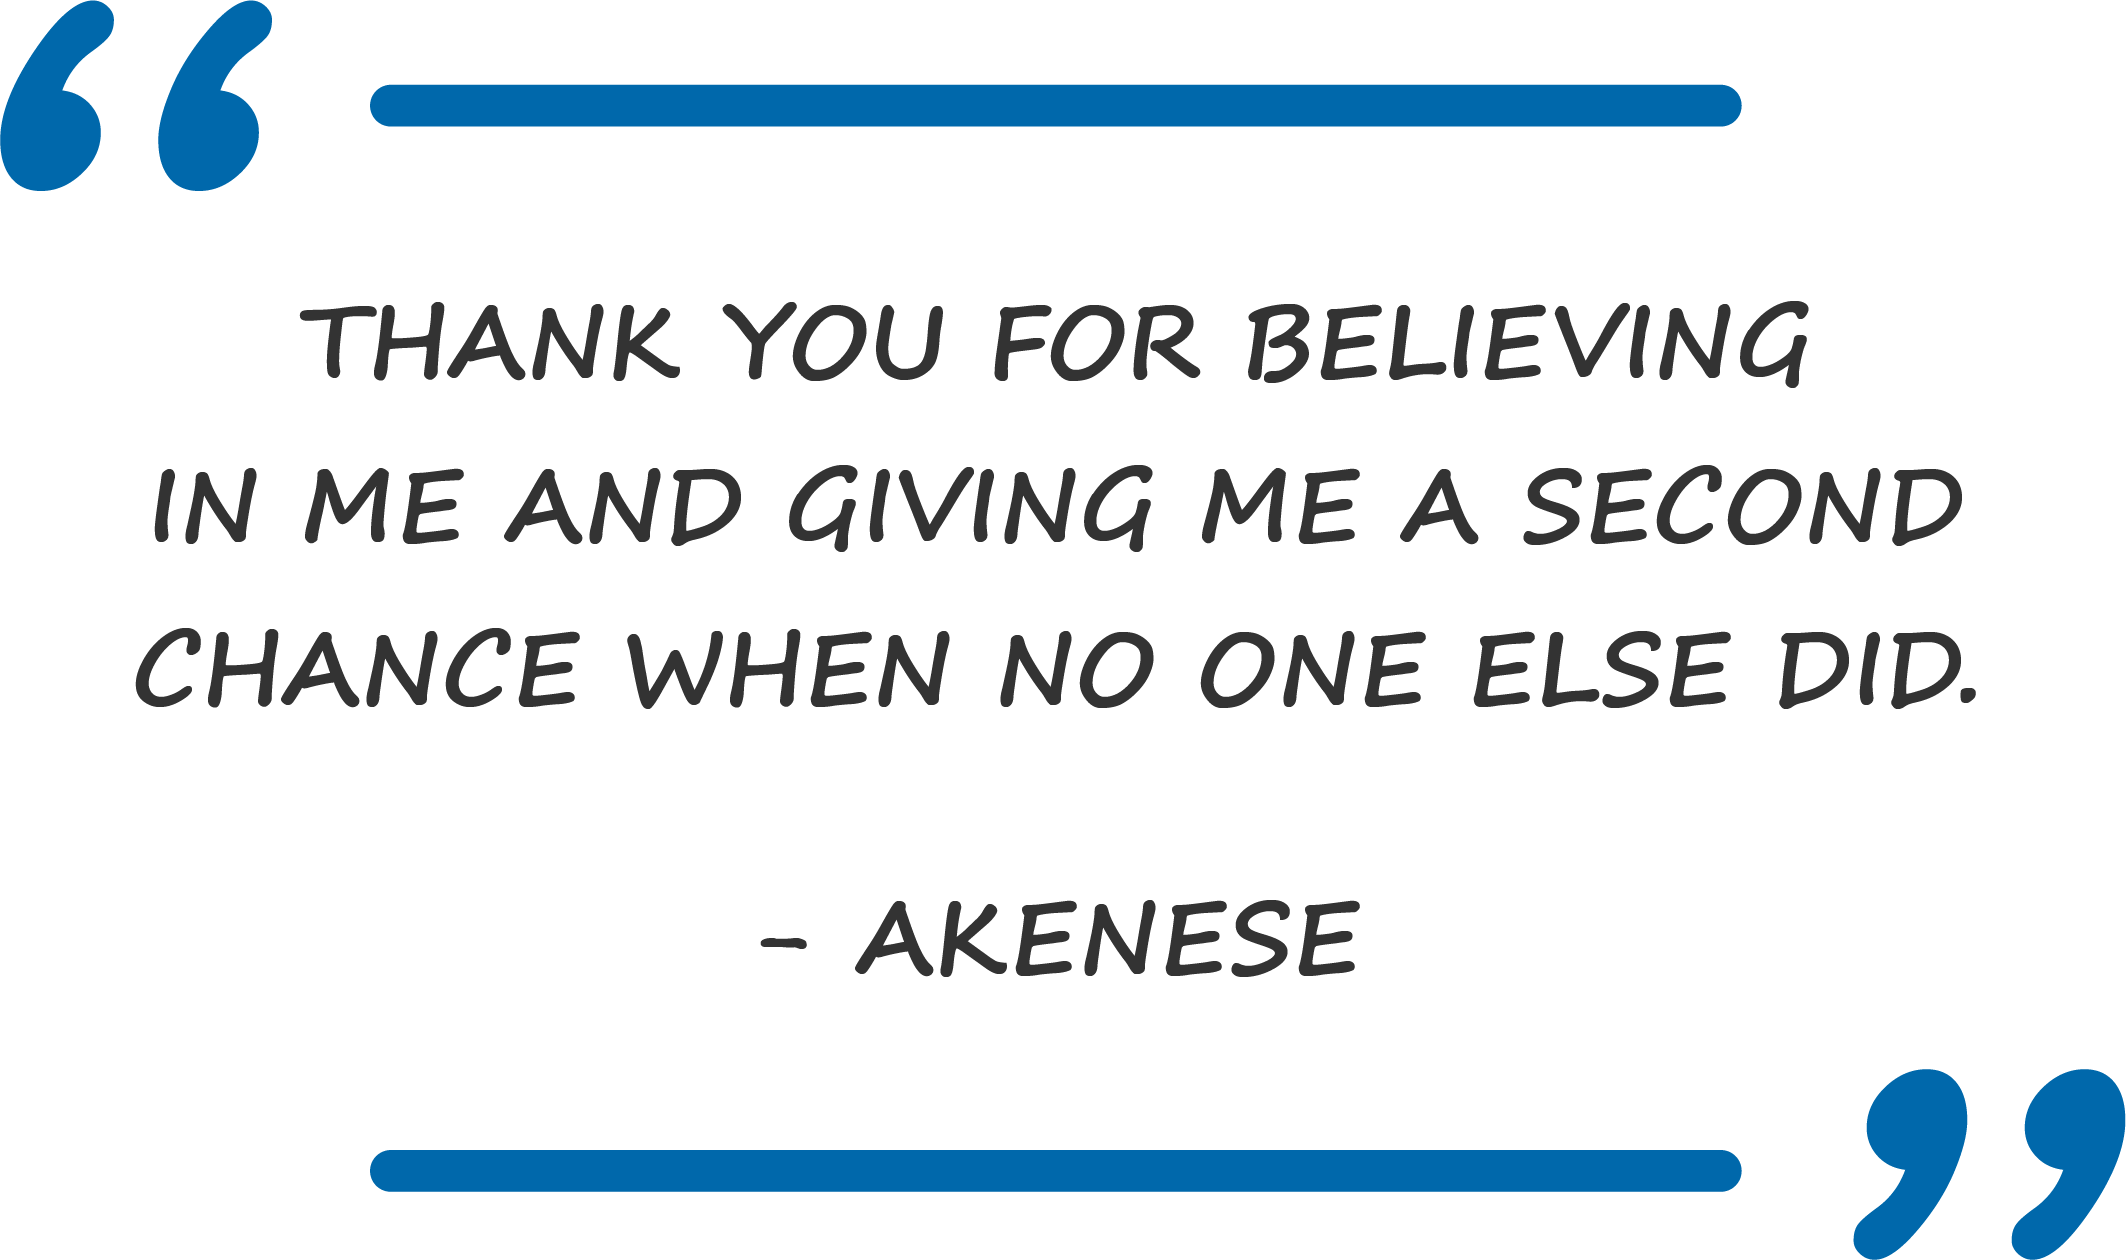 Akenese quote.png